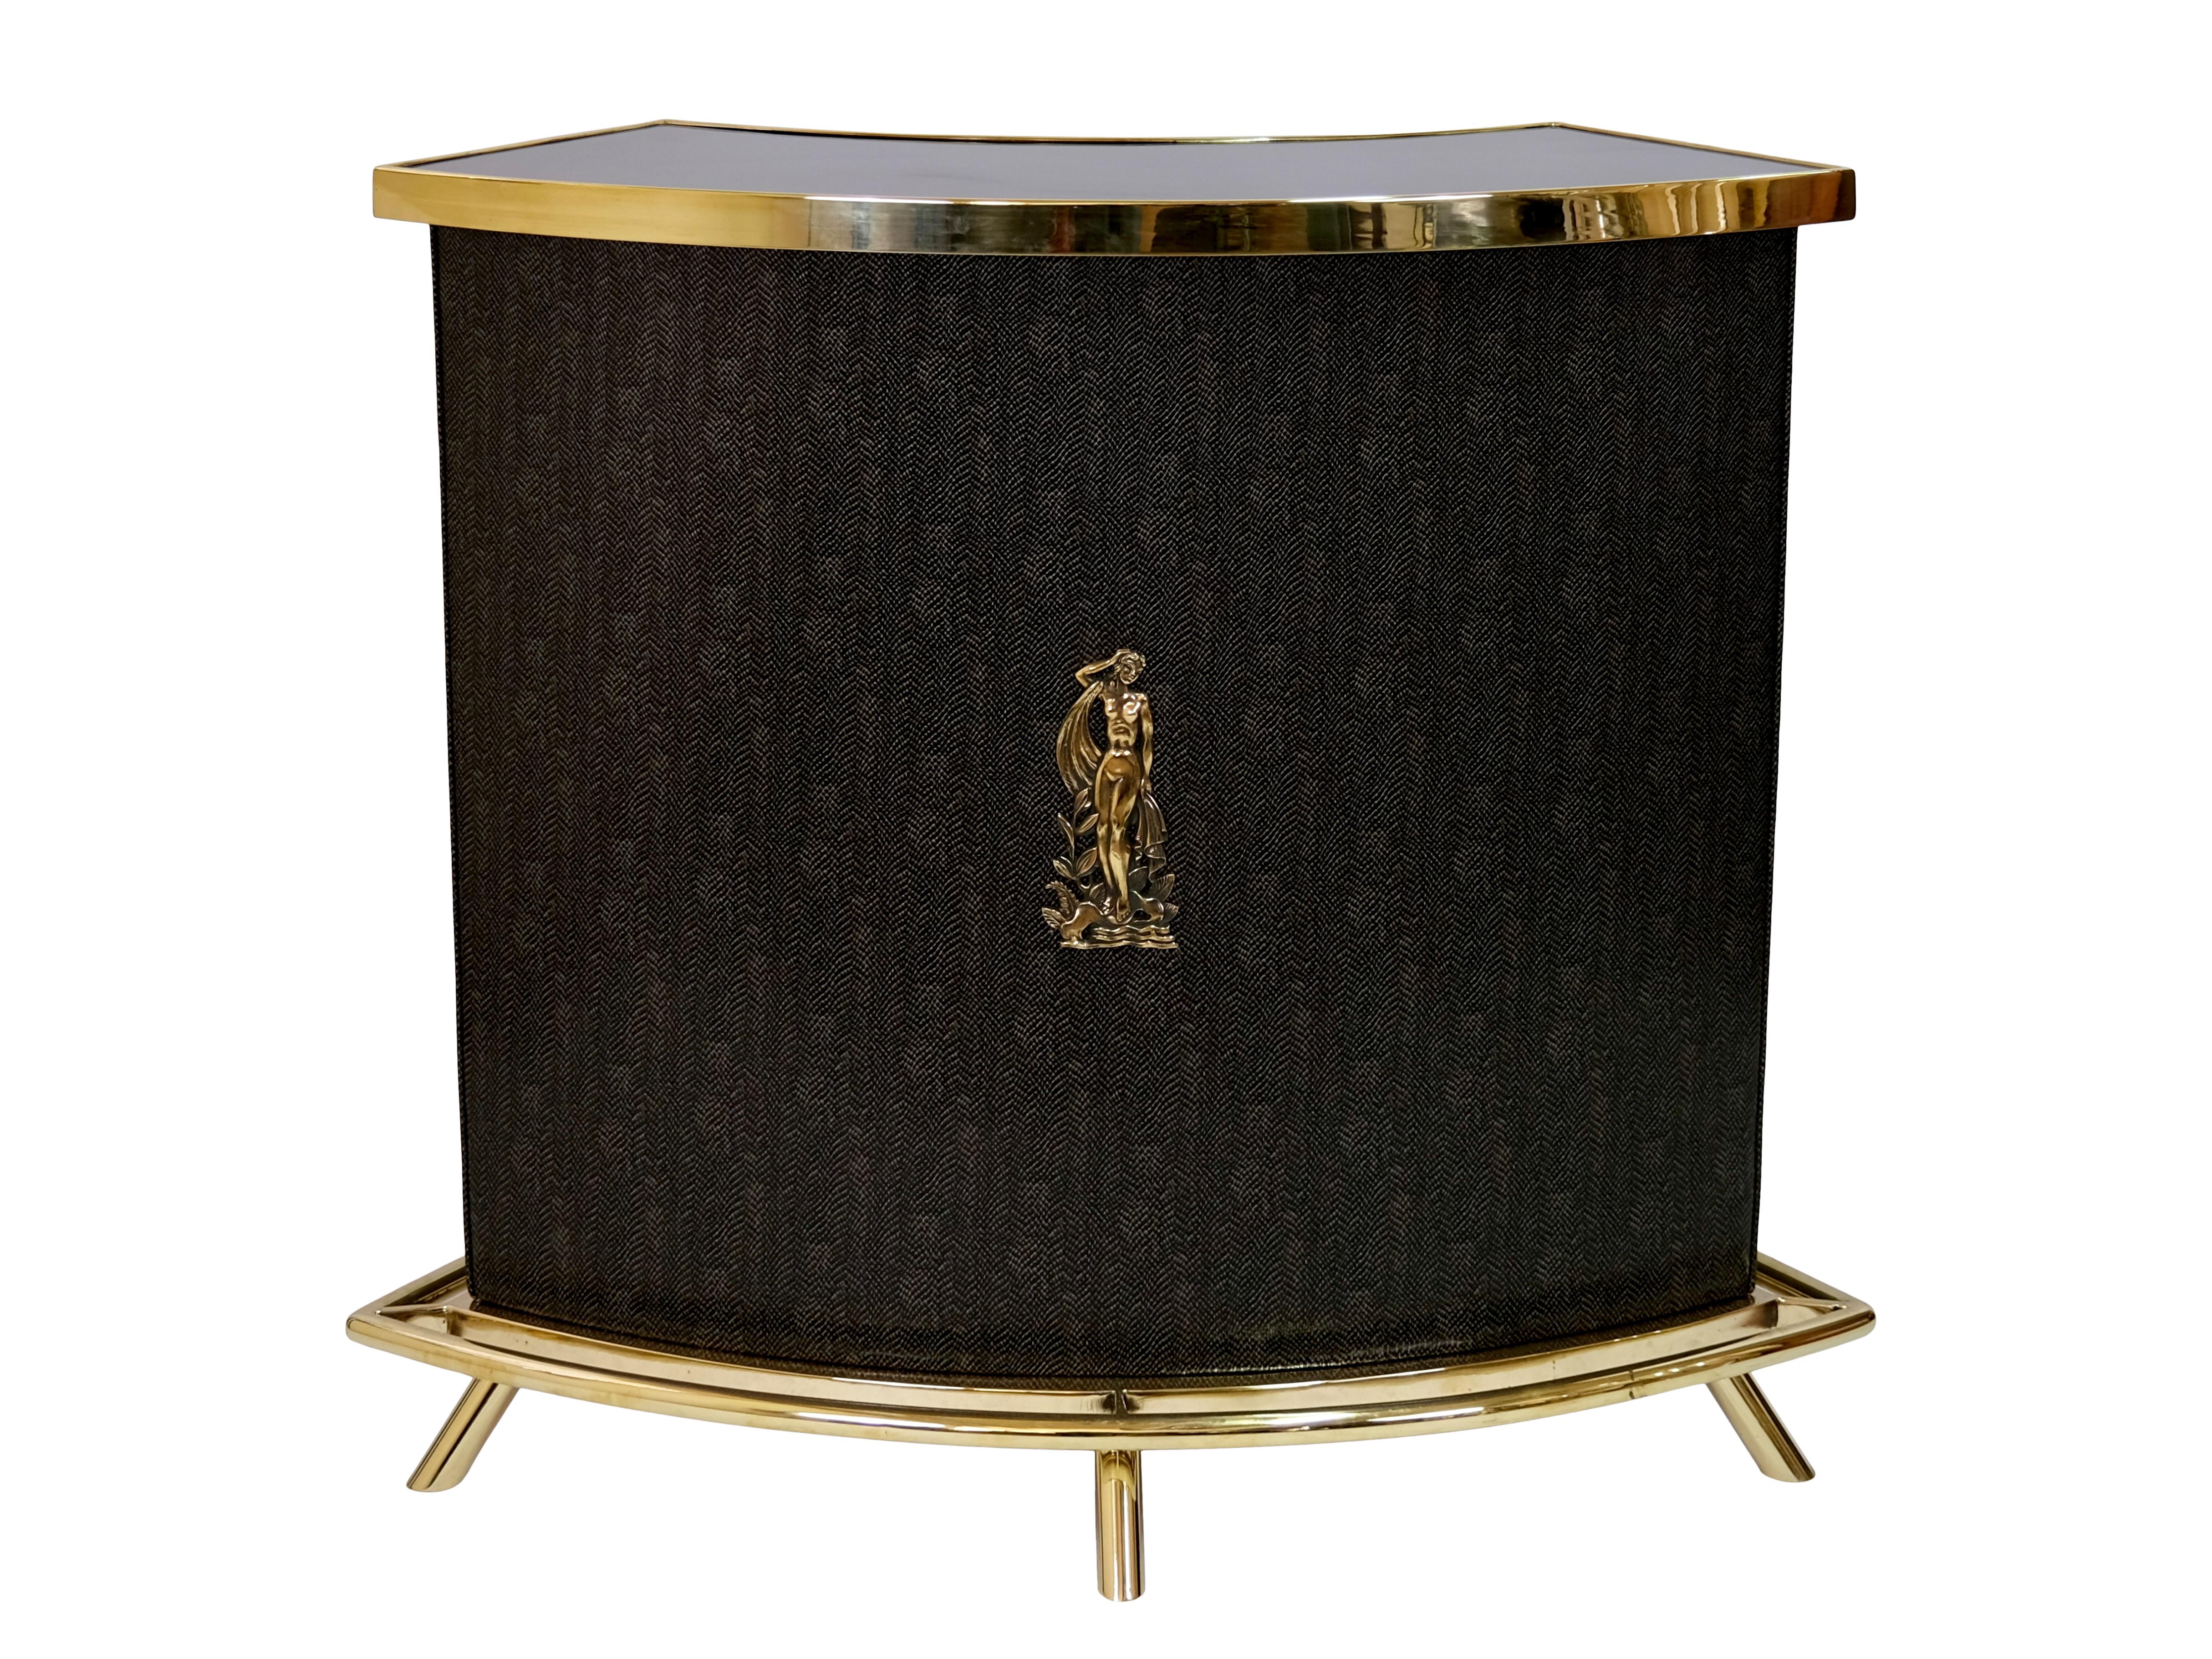 Curved Room Bar with three Stools
Brass and black piano lacquer
Fresh upholstery 
Faux leather with snake embossing. 
High quality restoration. 

Made in the Style of Art Deco 
France 1950s

Dimensions, bar:
Width: 113 cm
height: 103